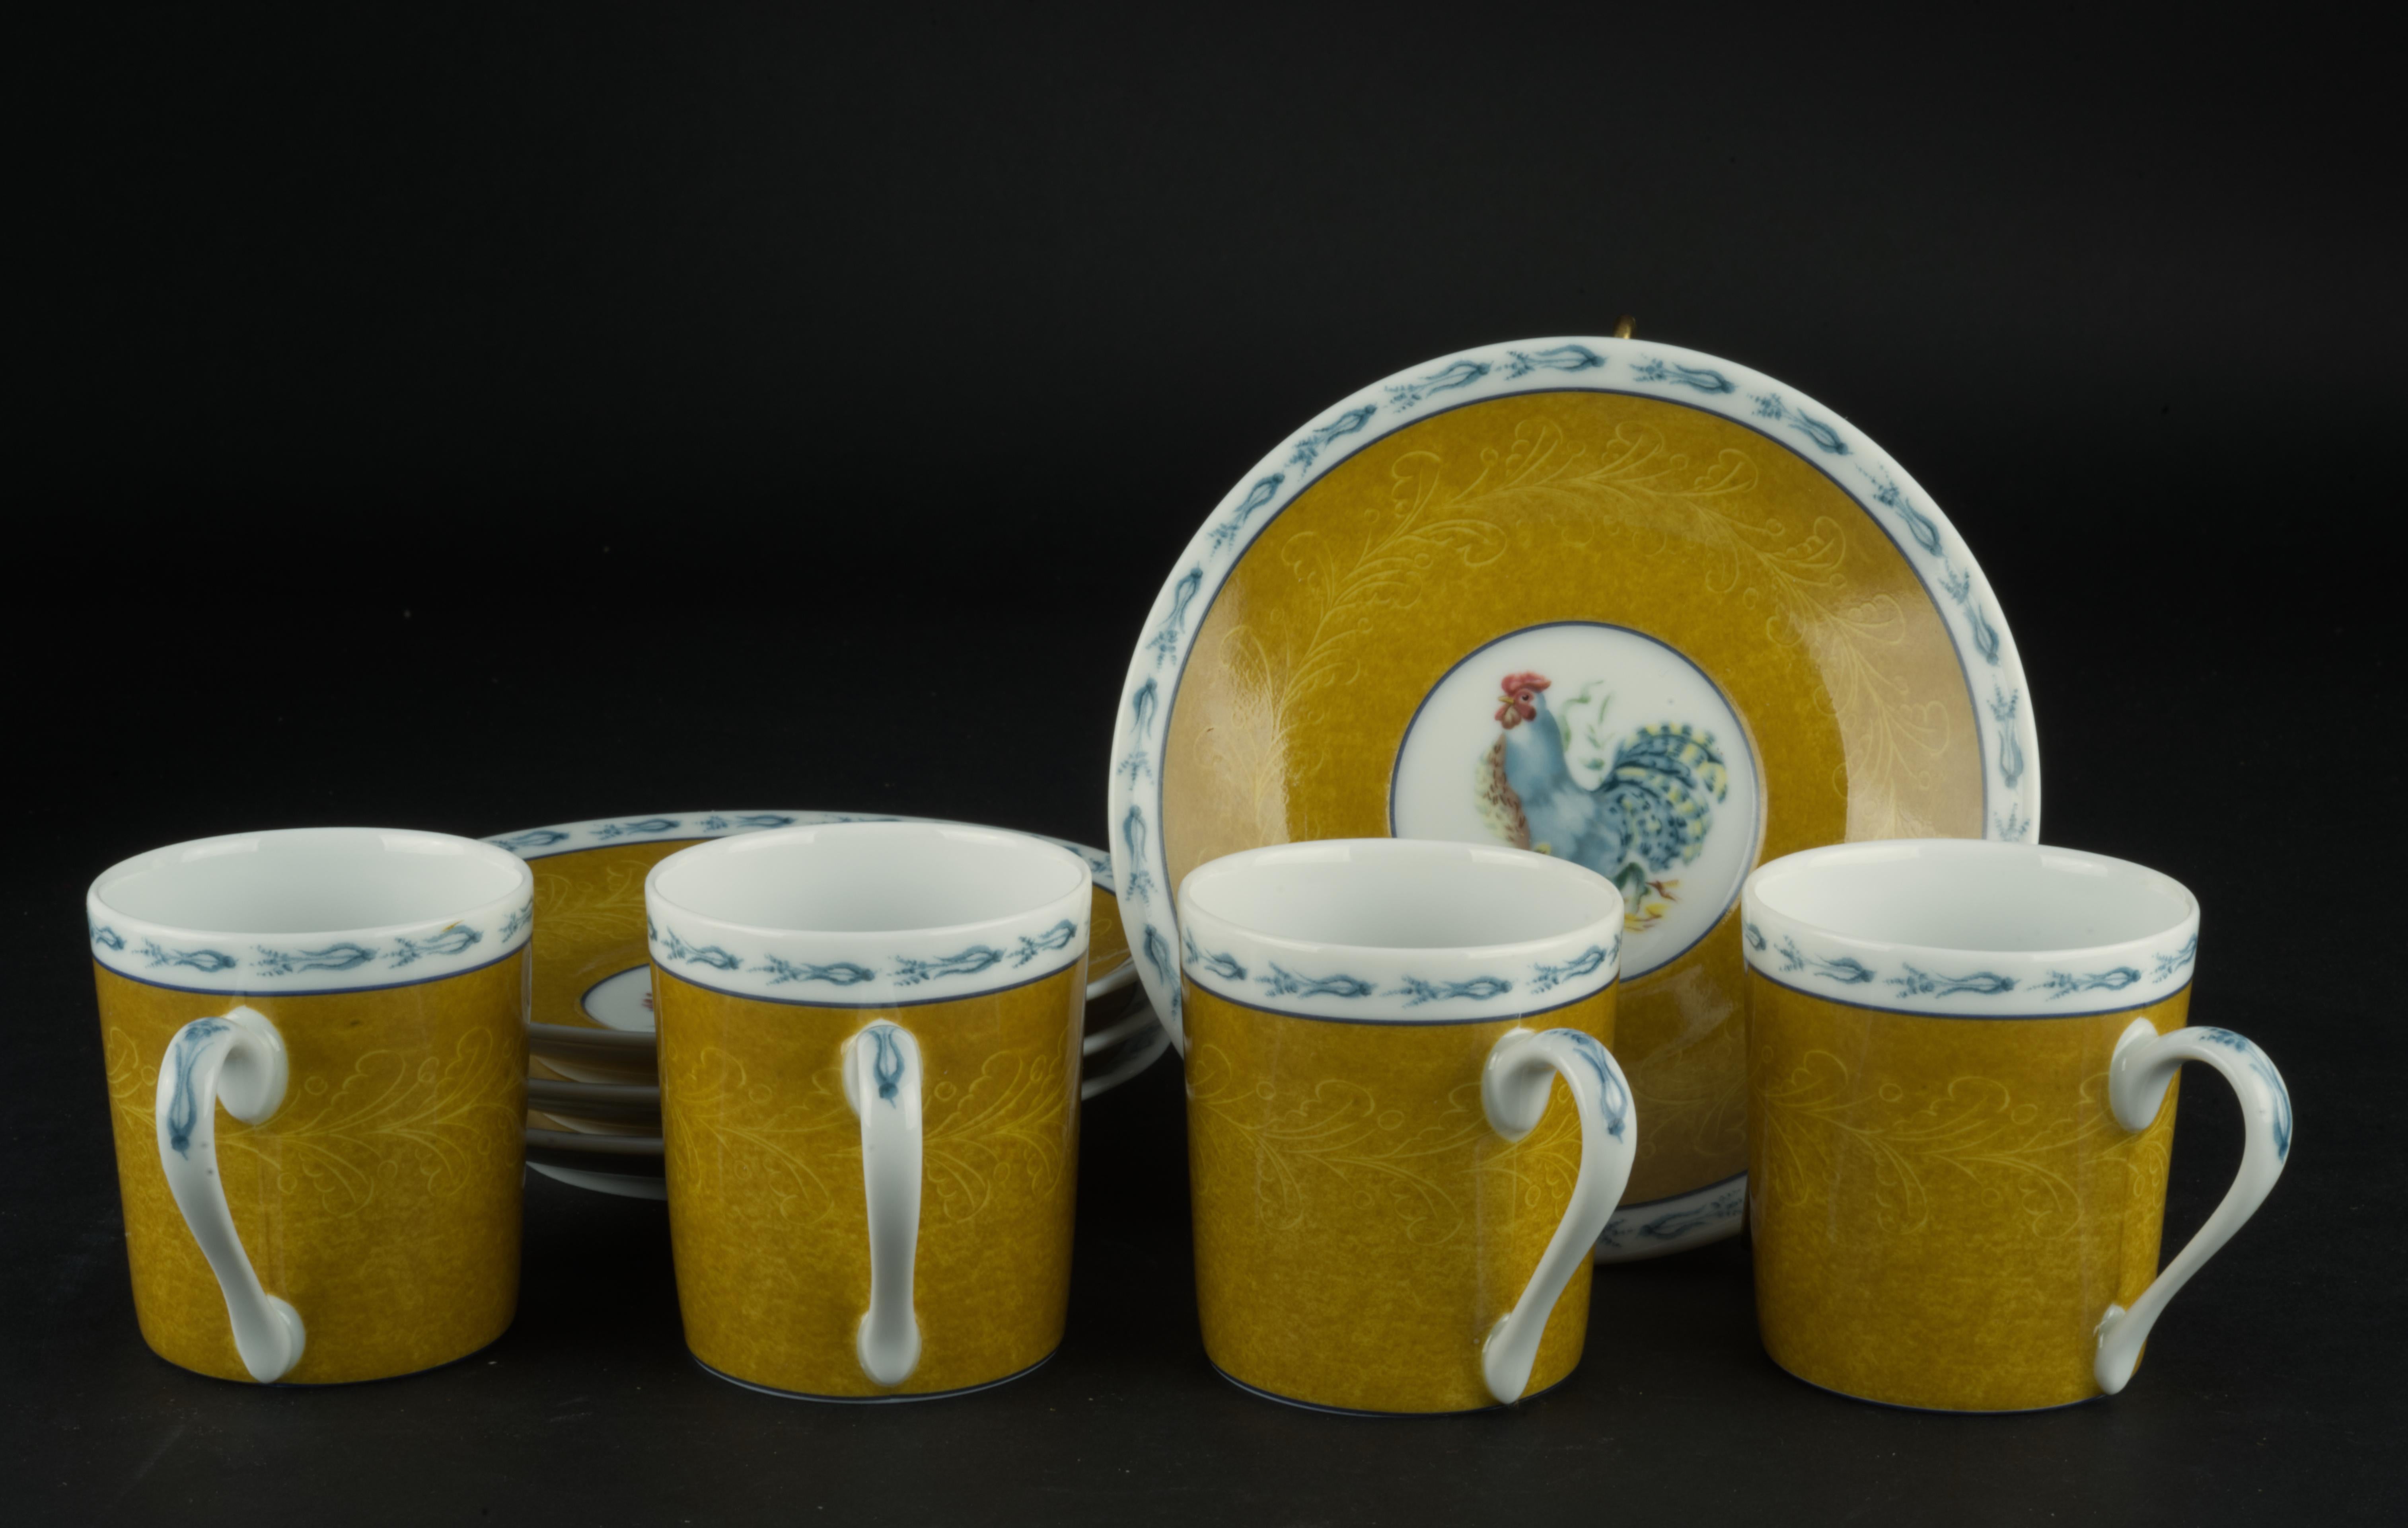 Demitasse cups and saucers in Basse Cour pattern by Pierre Frey were made in France by Porcelaine de Limoges. The set consists of 4 cups and 4 saucers; at the time of the listing we have 4 sets available.

Basse Cour is a rare, discontinued pattern